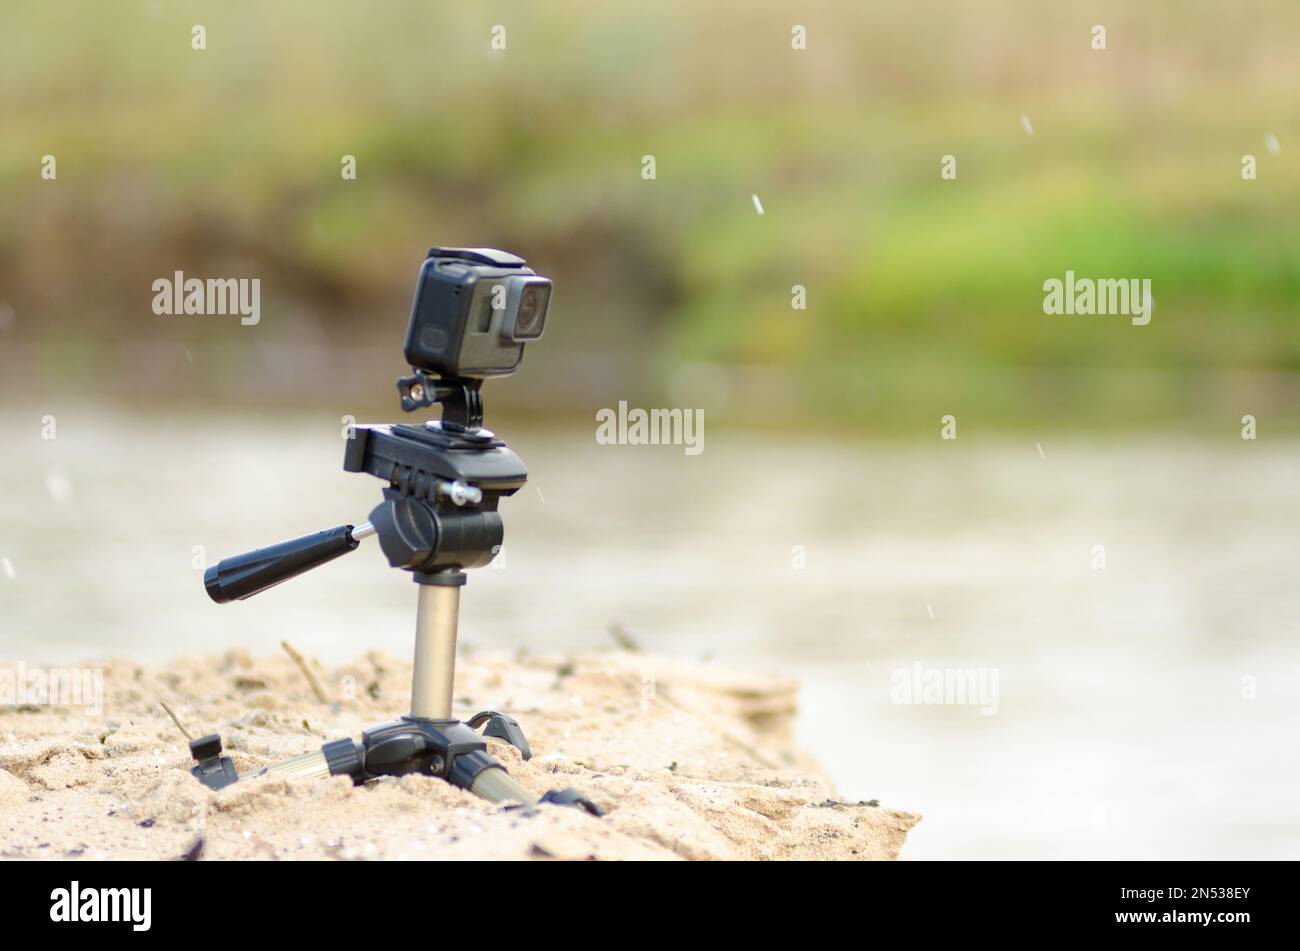 Action camera stands on a small tripod, recording video, on the sandy Bank of the river with grass and rain. Stock Photo